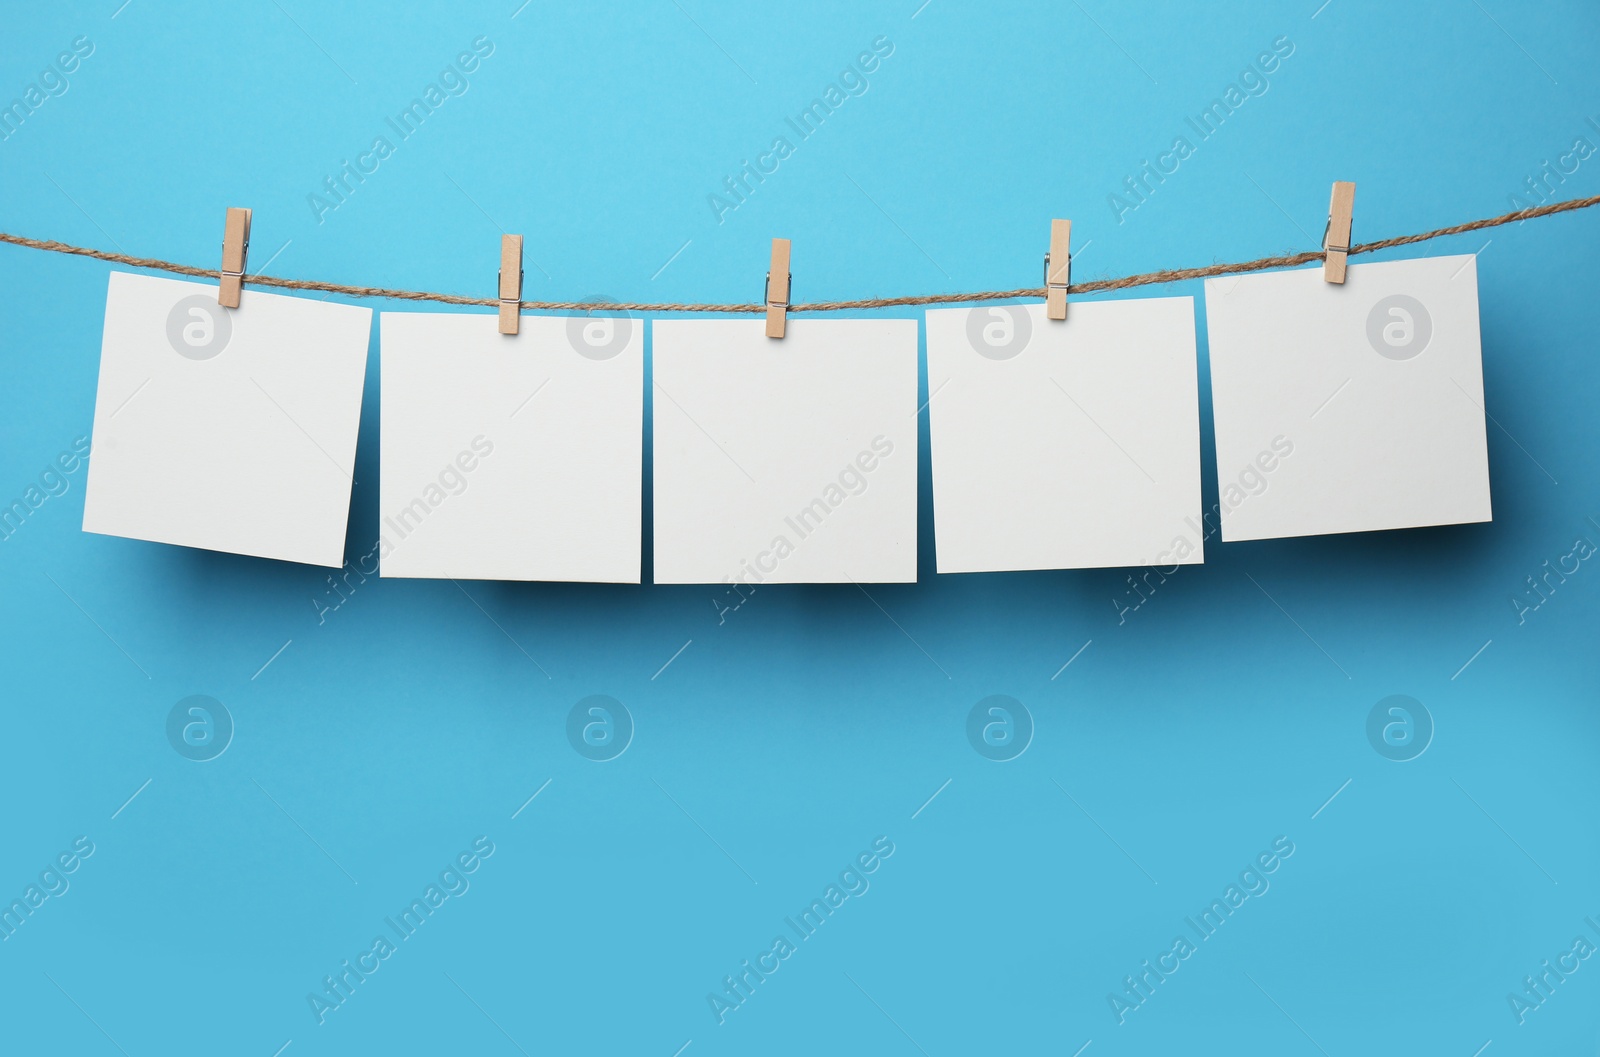 Photo of Wooden clothespins with blank notepapers on twine against light blue background. Space for text